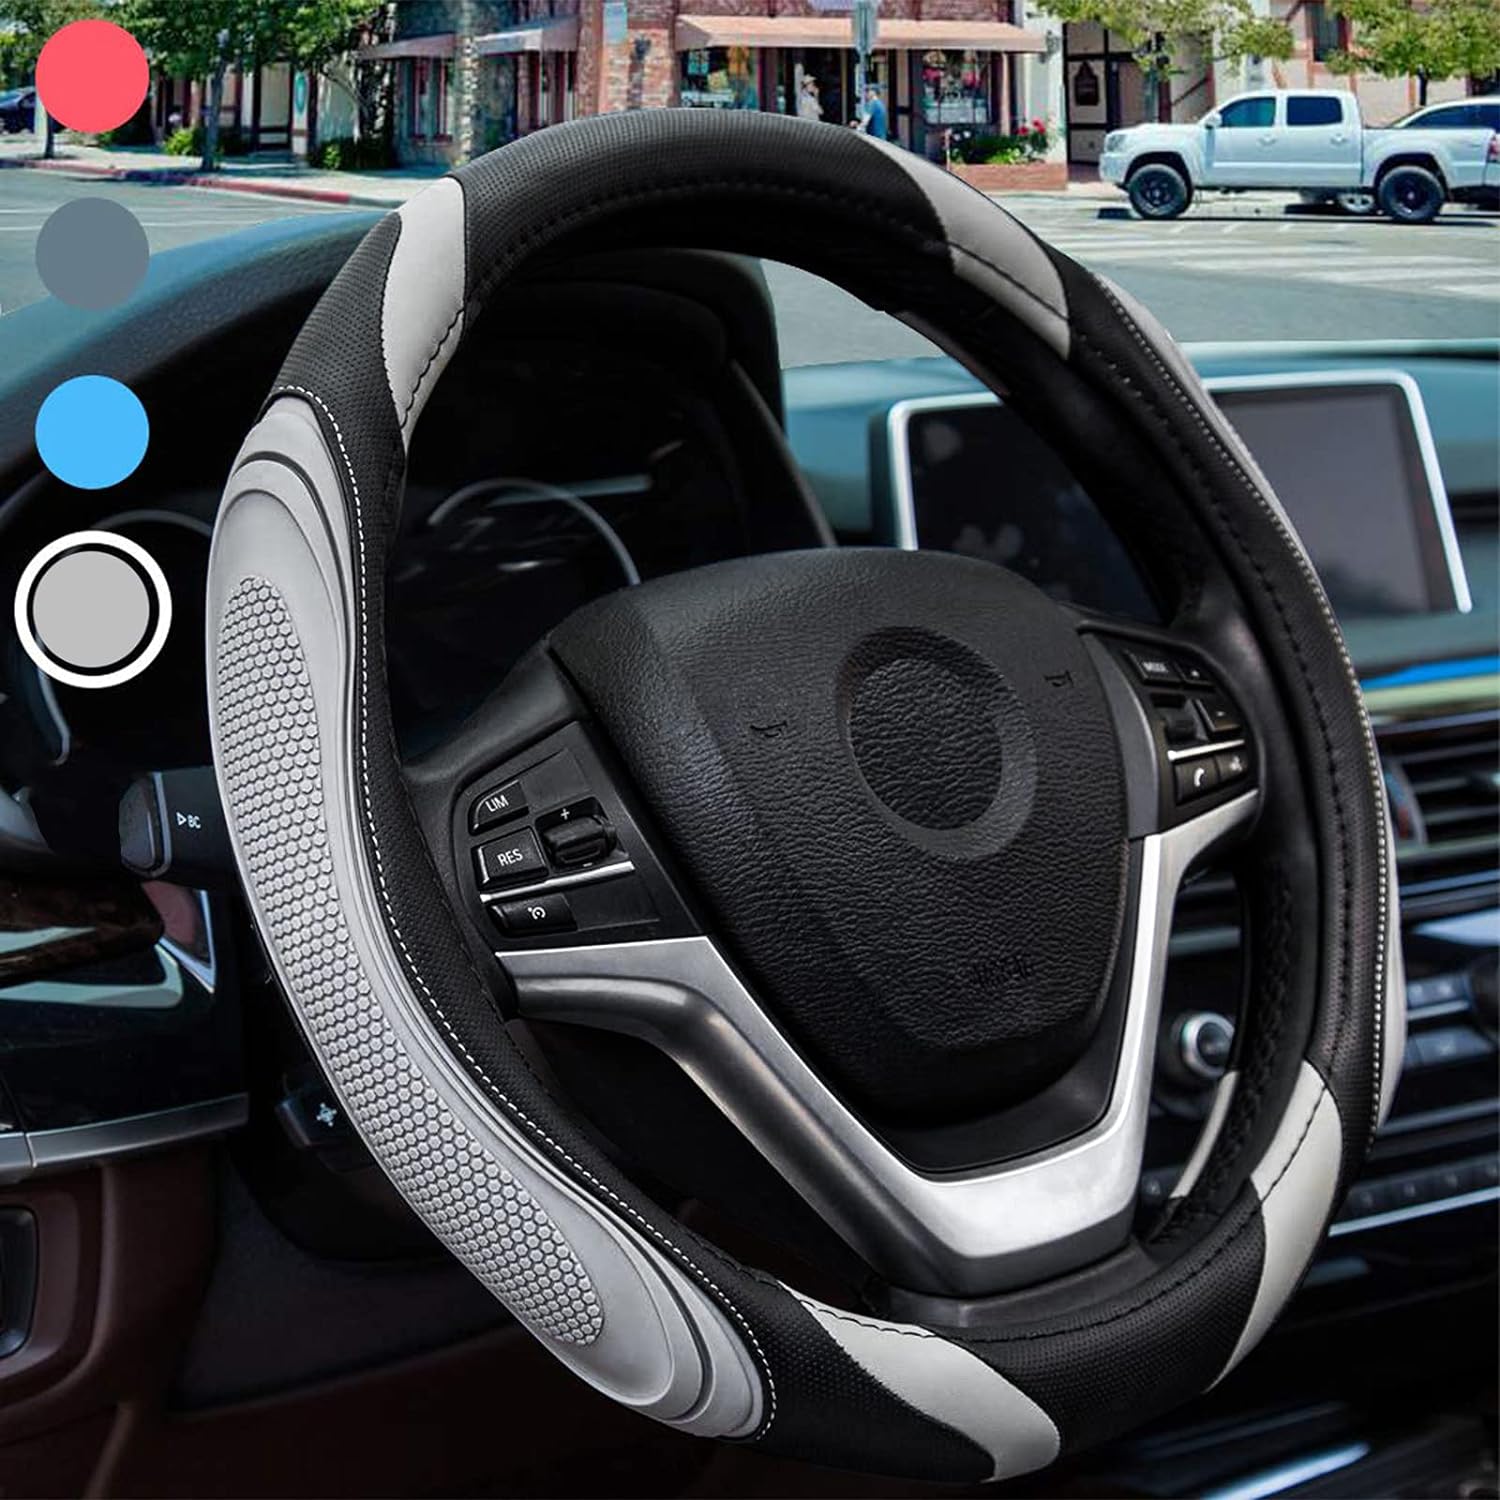 Steering Wheel Cover - Car Wheel Cover Leather, Sportage Universal Size M 37-38cm /14.5-15inch, Anti-slip, Breathable, Grey